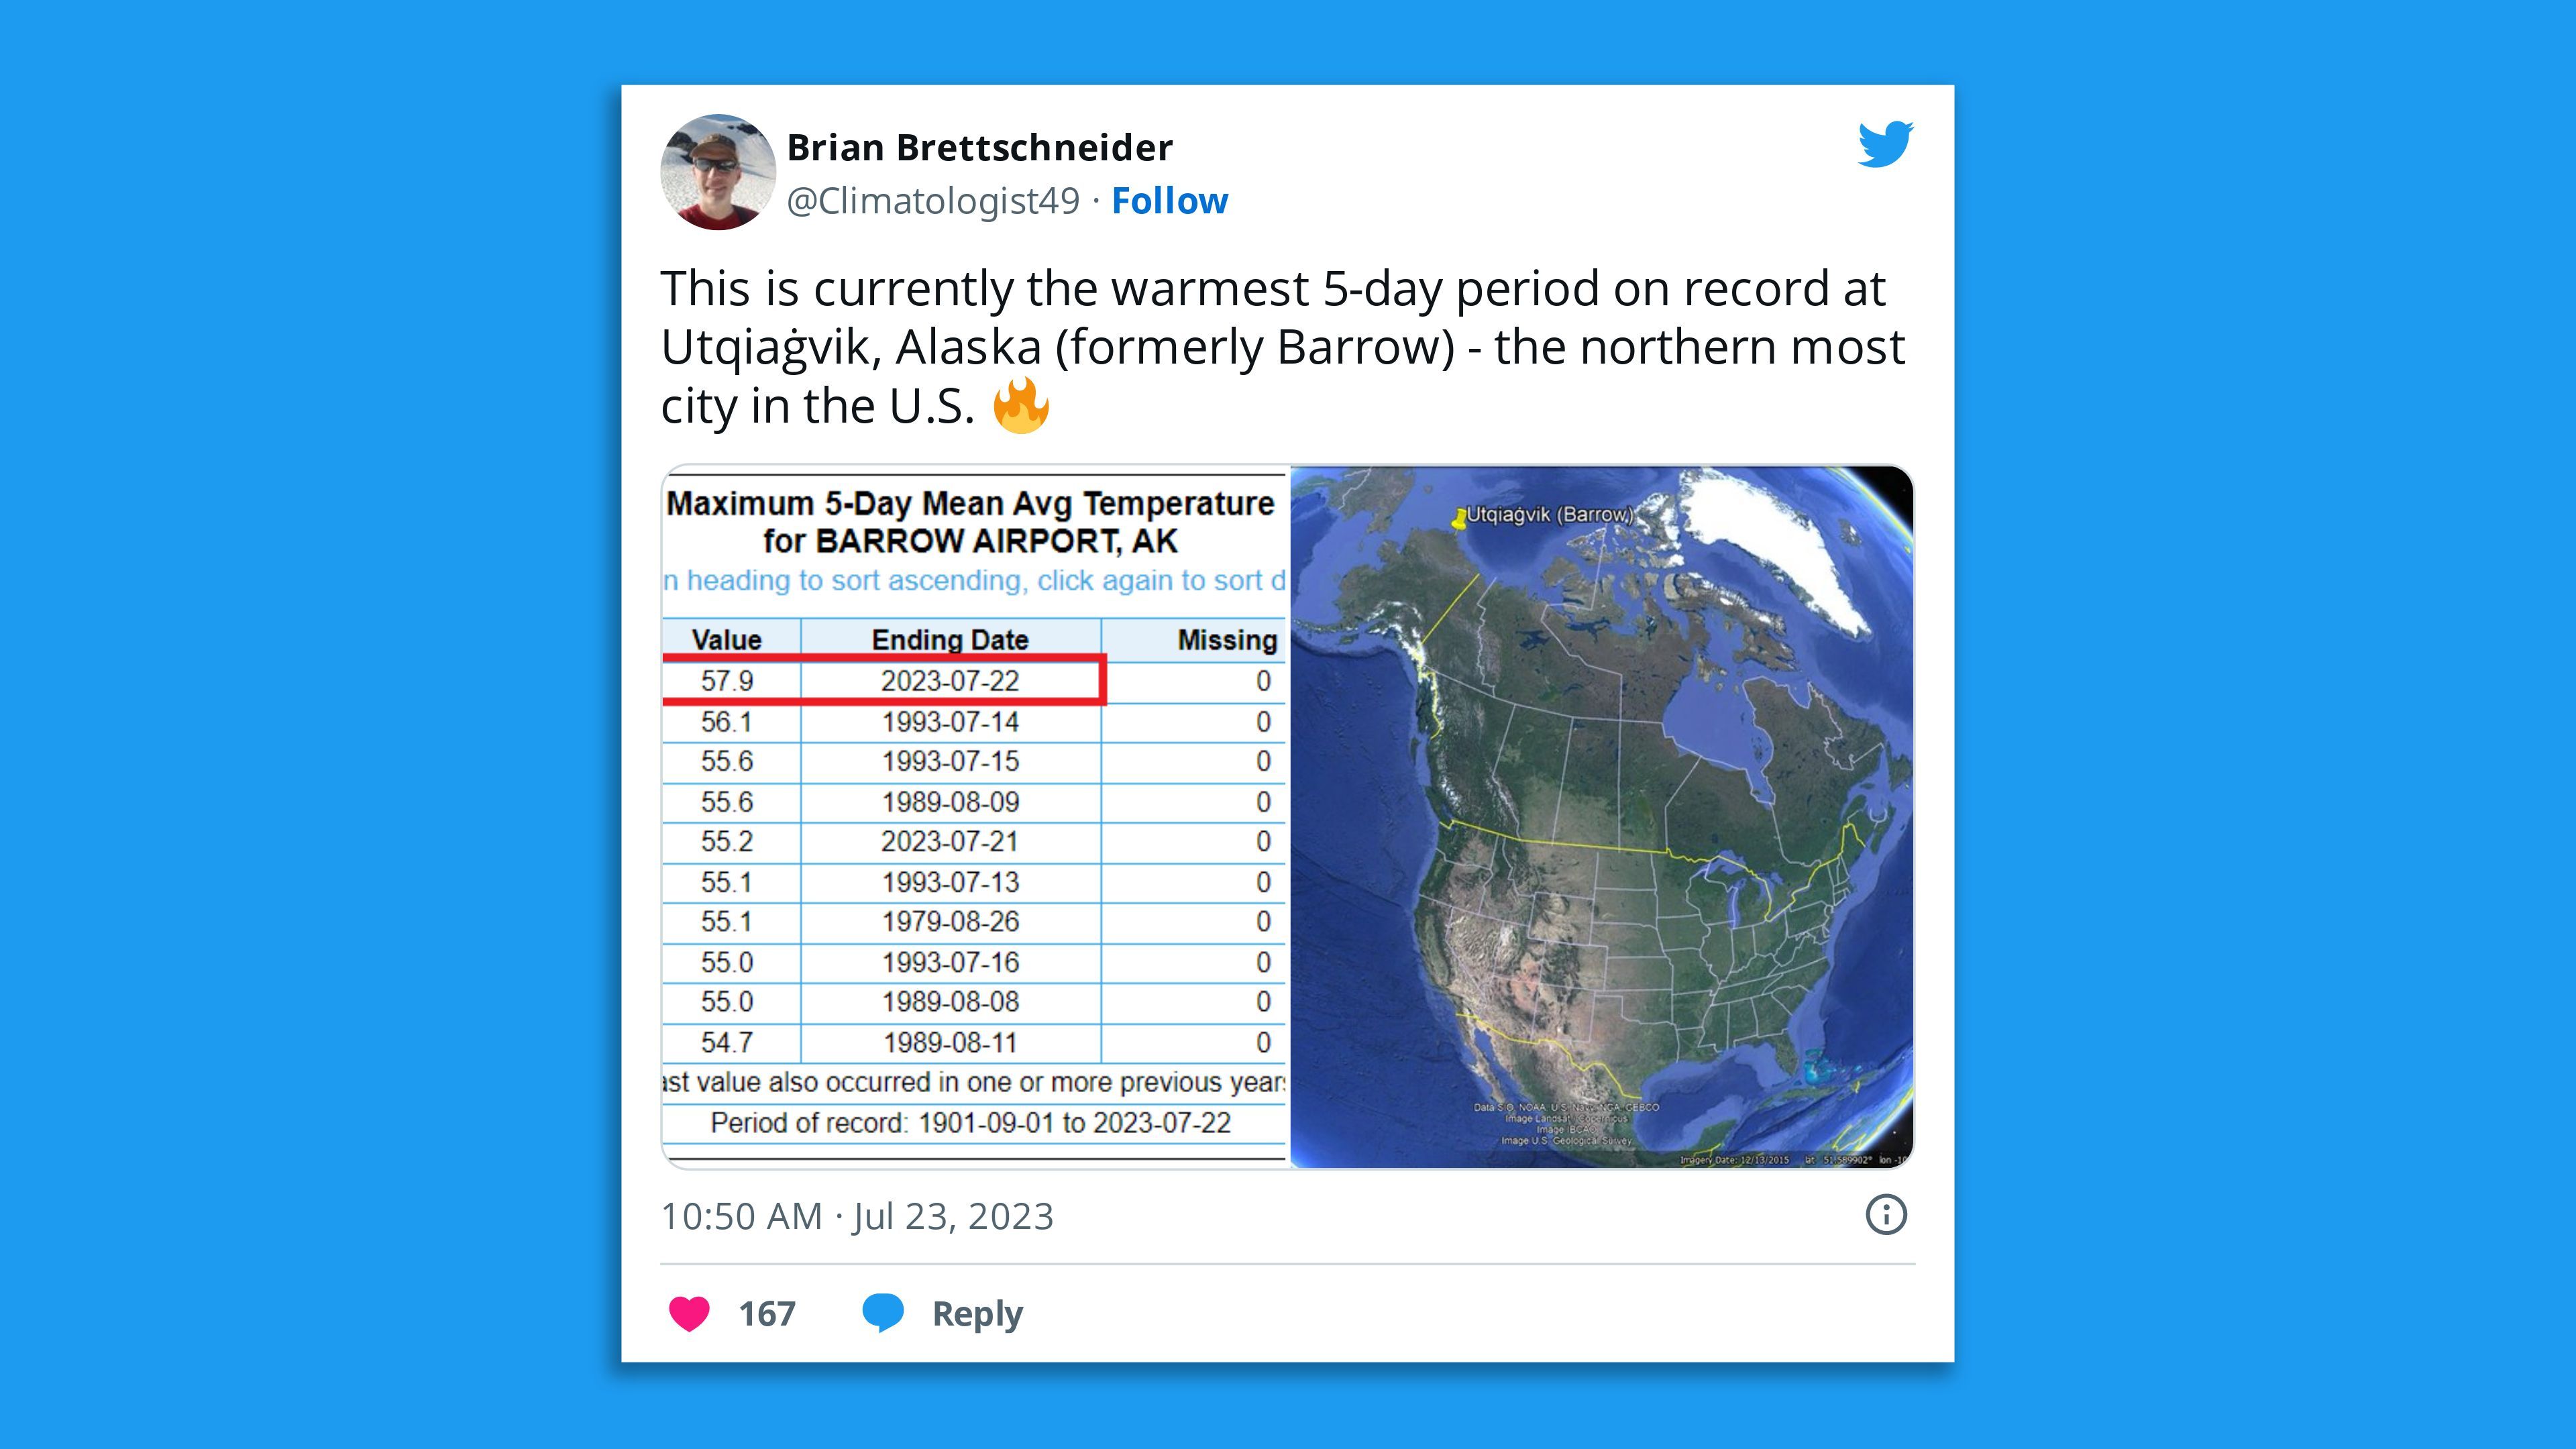 A screenshot of a tweet by an Alaskan climatologist saying: "This is currently the warmest 5-day period on record at Utqiaġvik, Alaska (formerly Barrow) - the northern most city in the U.S."